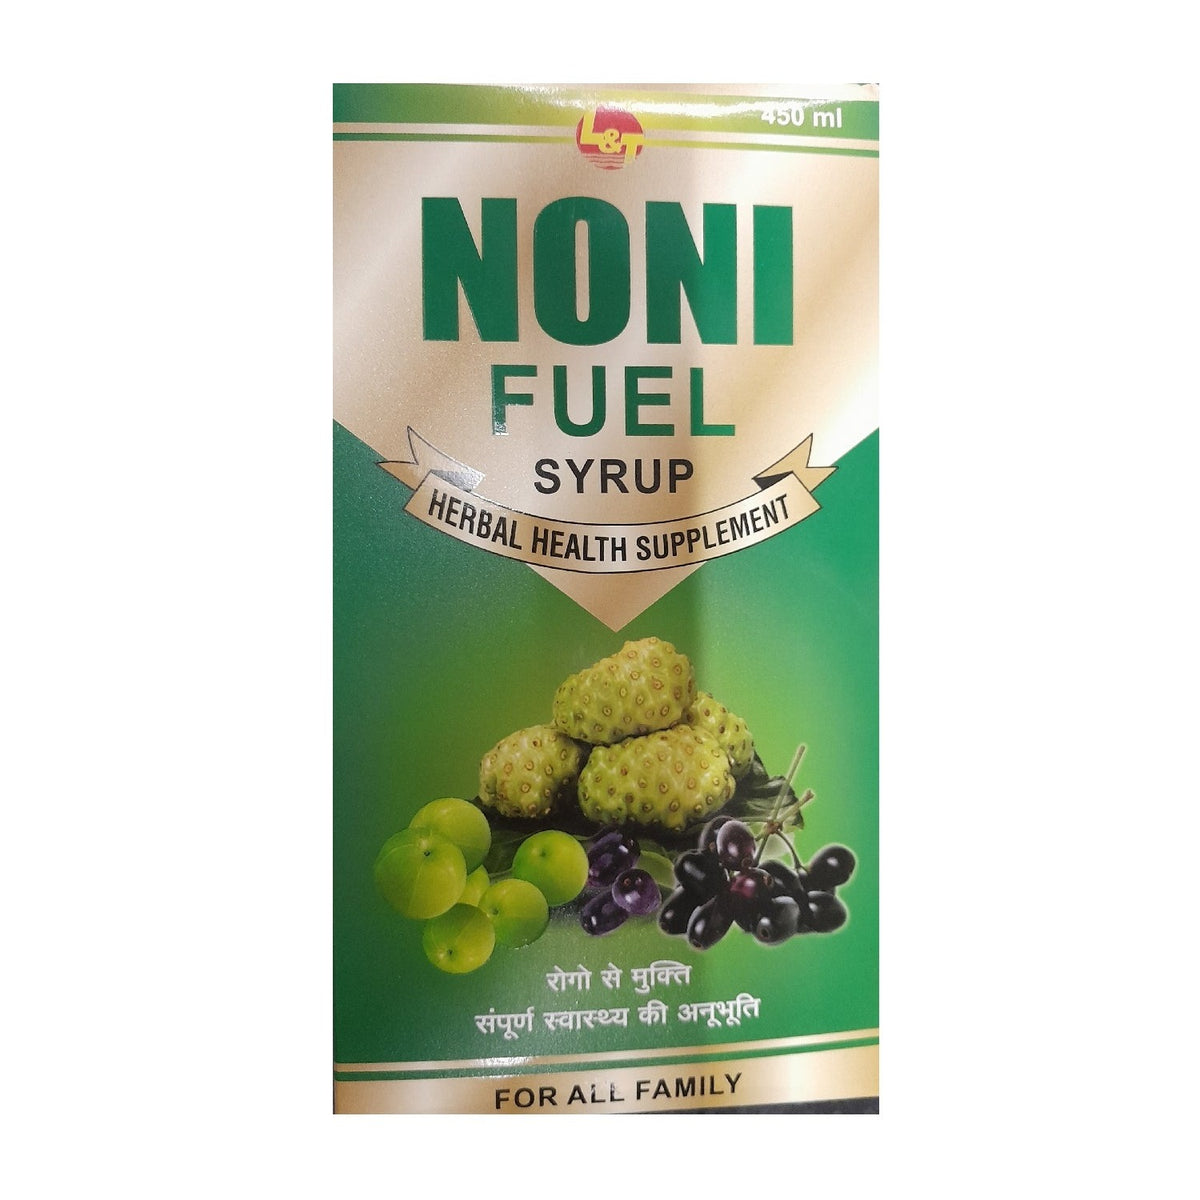 L & T Healthcare Noni Fuel Herbal Health Supplement For All Family Syrup 450ml